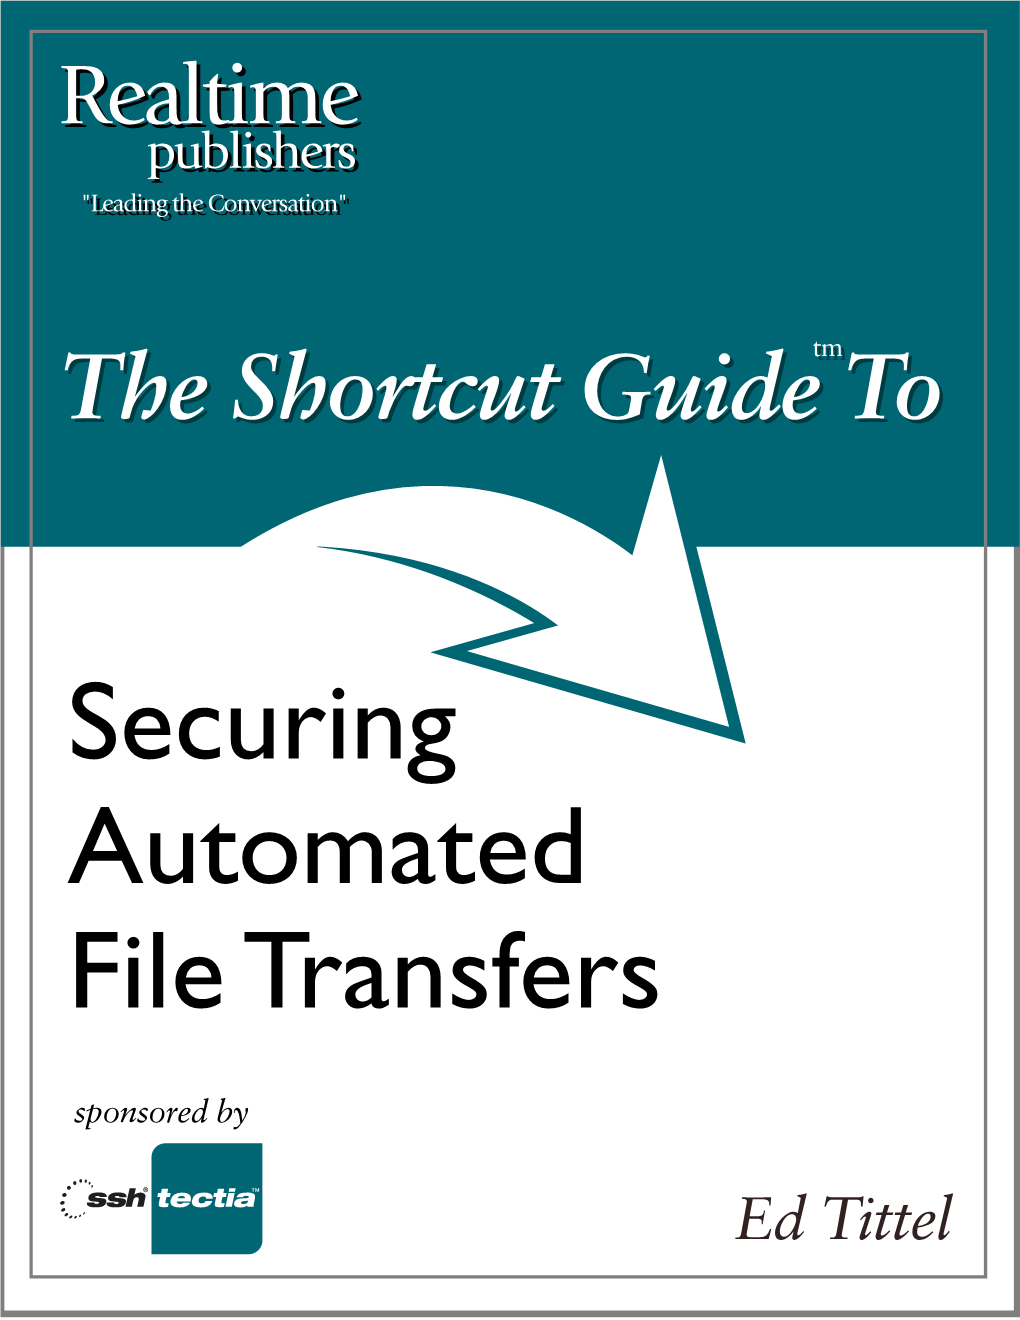 The Shortcut Guide to Securing Automated File Transfers